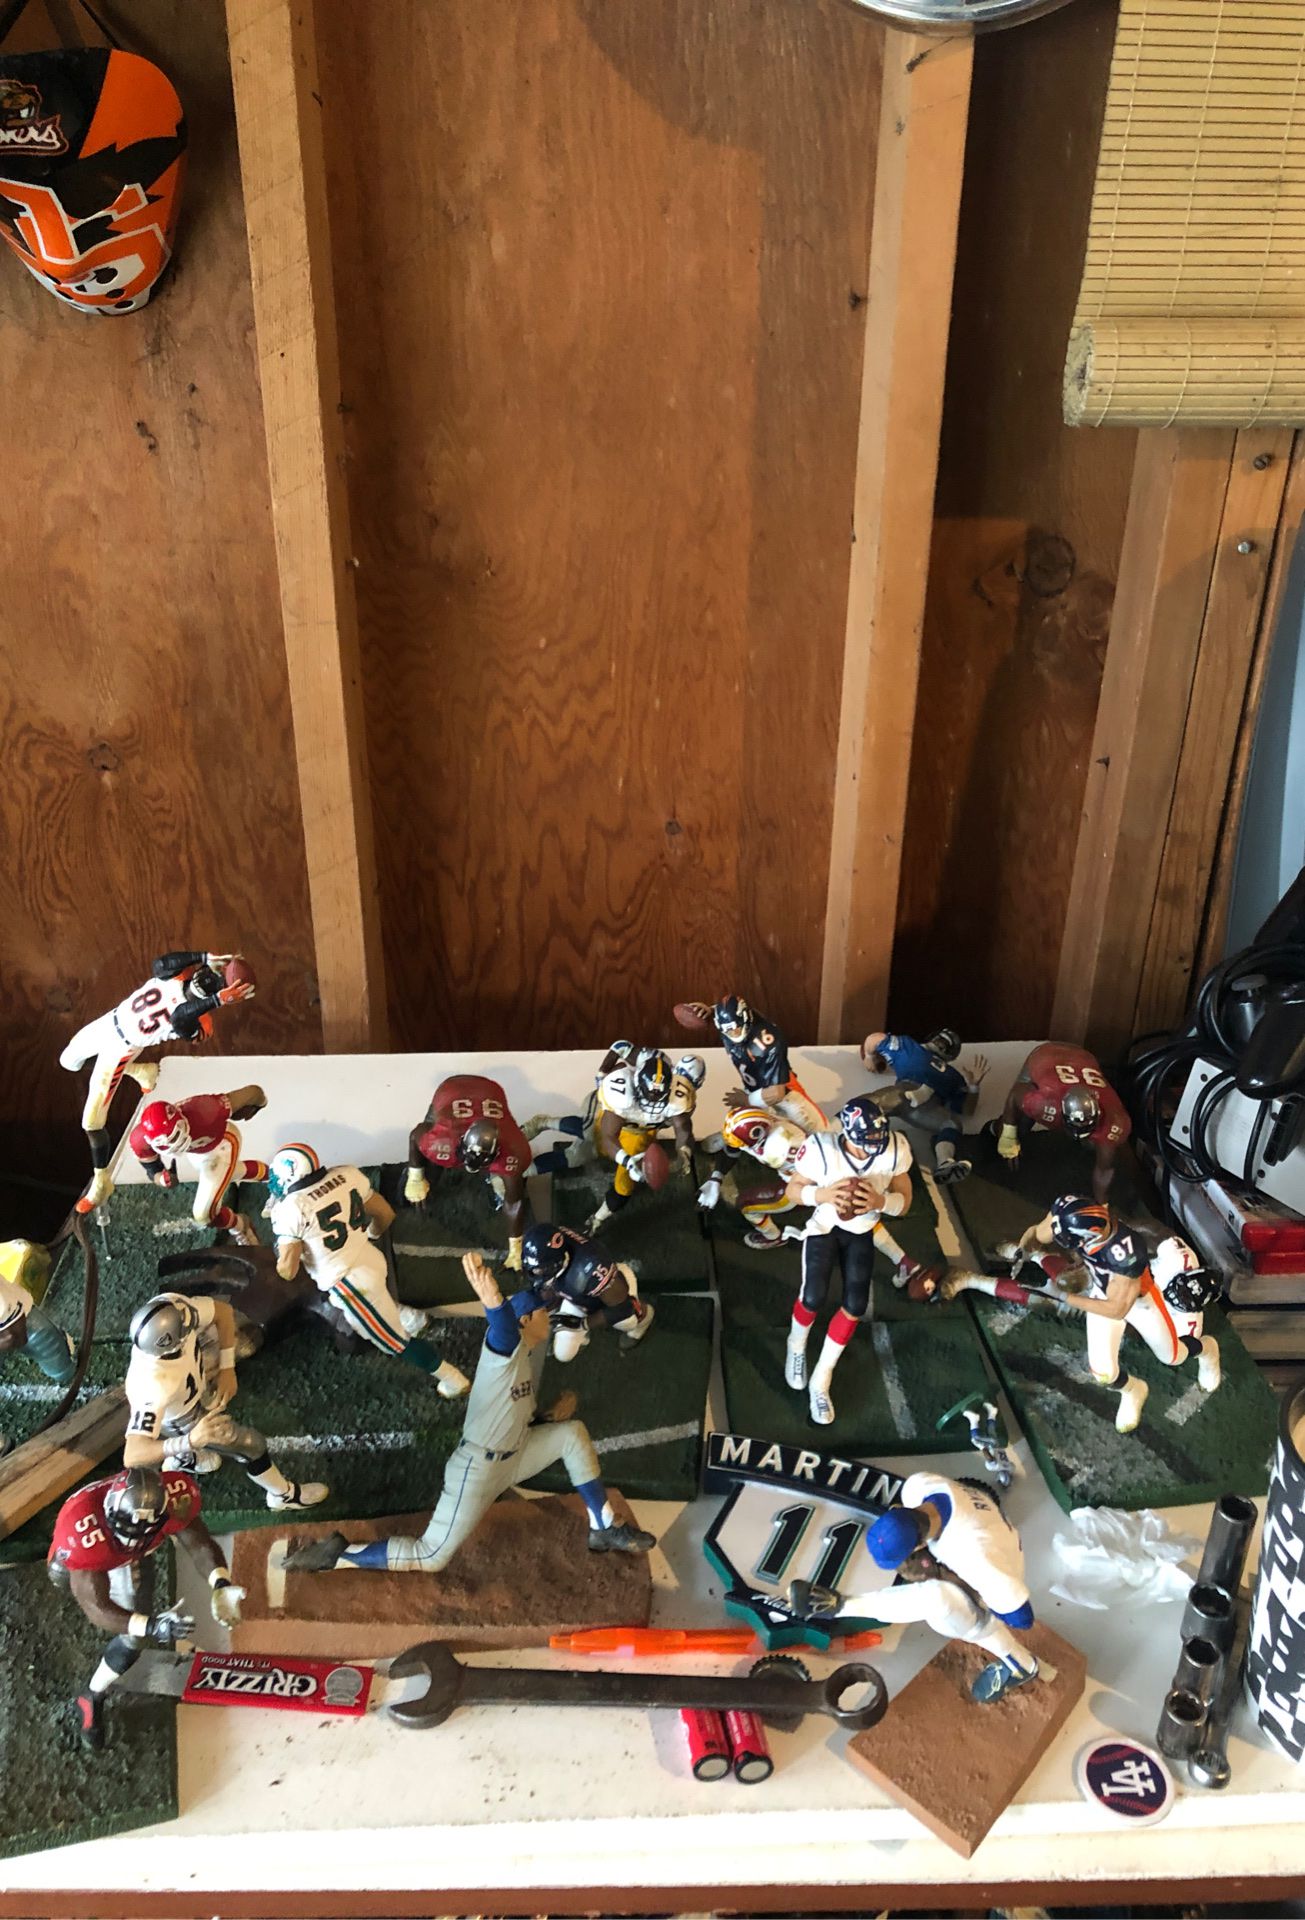 Action figures from the mid 2000s